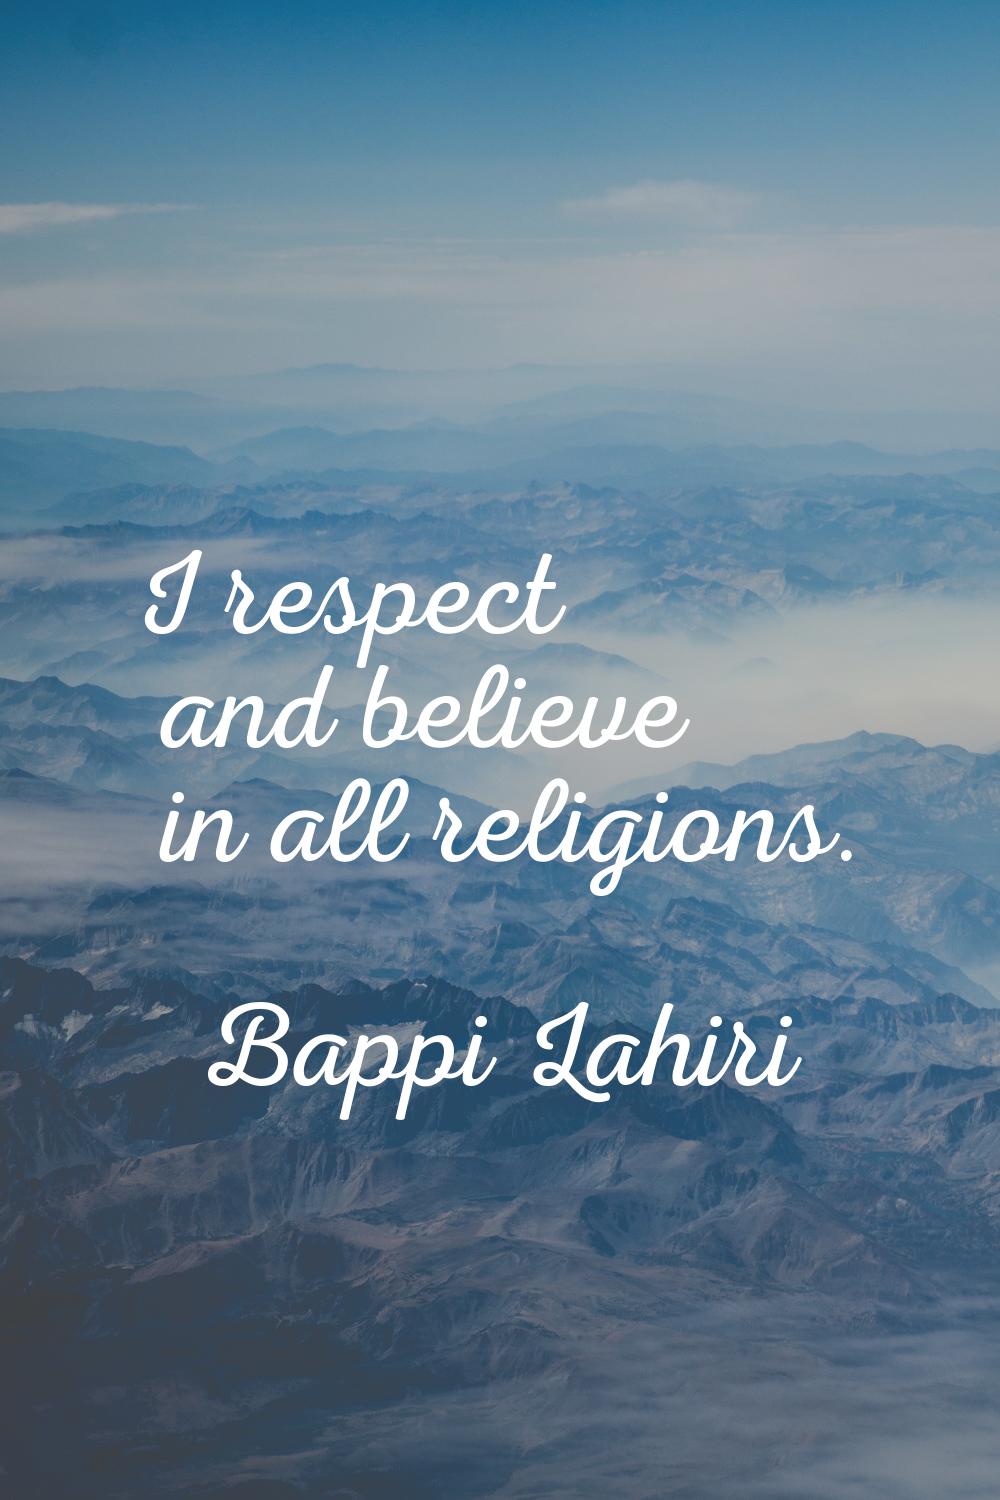 I respect and believe in all religions.